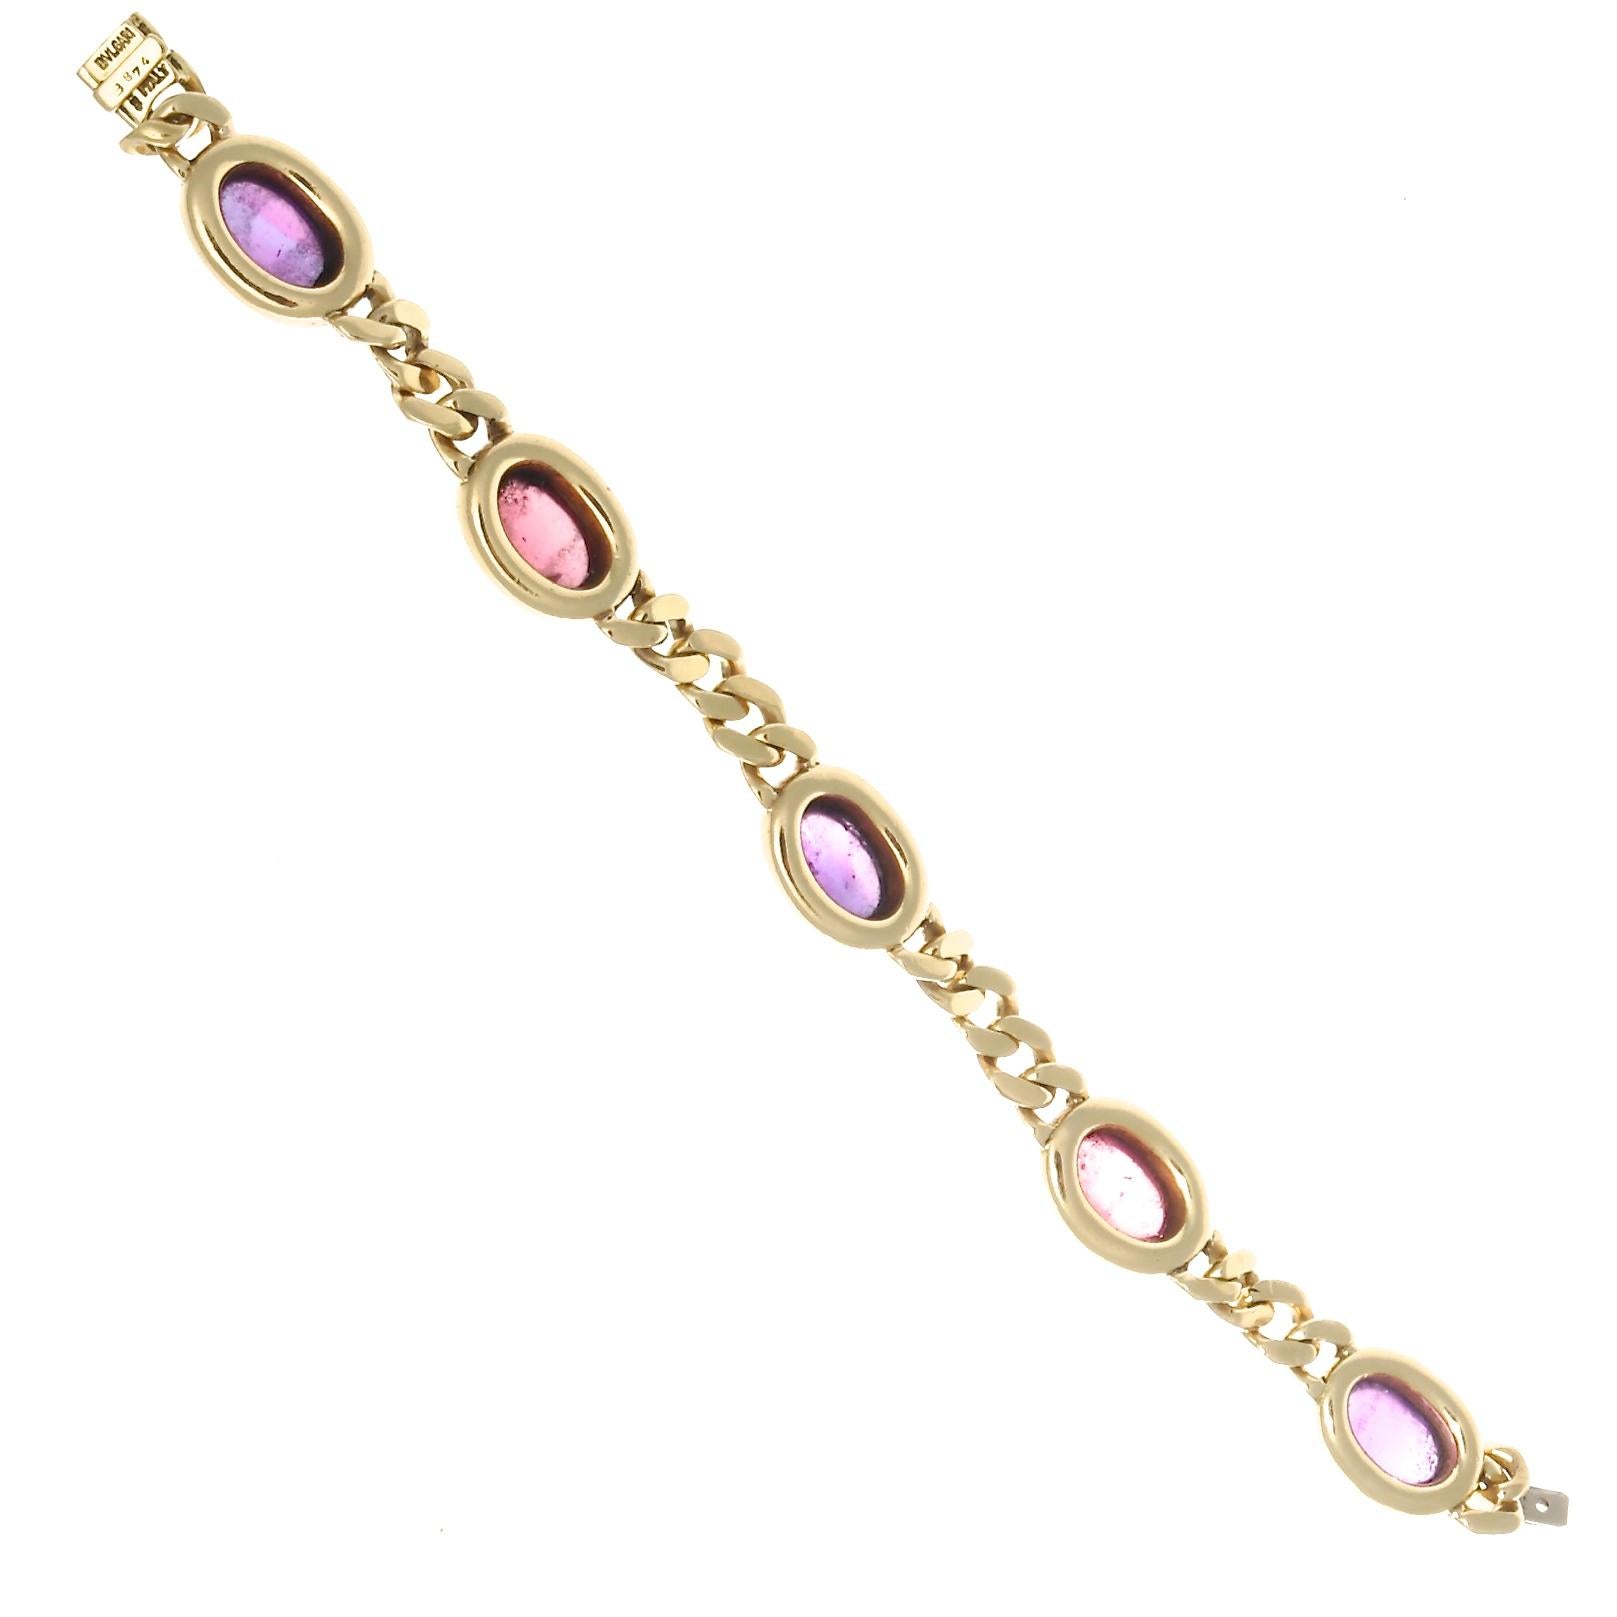 Elegant Italian design has always been the hallmark of Bulgari. Their jewelry is colorful feminine and bold. Featuring vibrant cabochon cut purple amethyst and pink tourmaline alternating between golden links of 18k gold. Signed Bulgari.